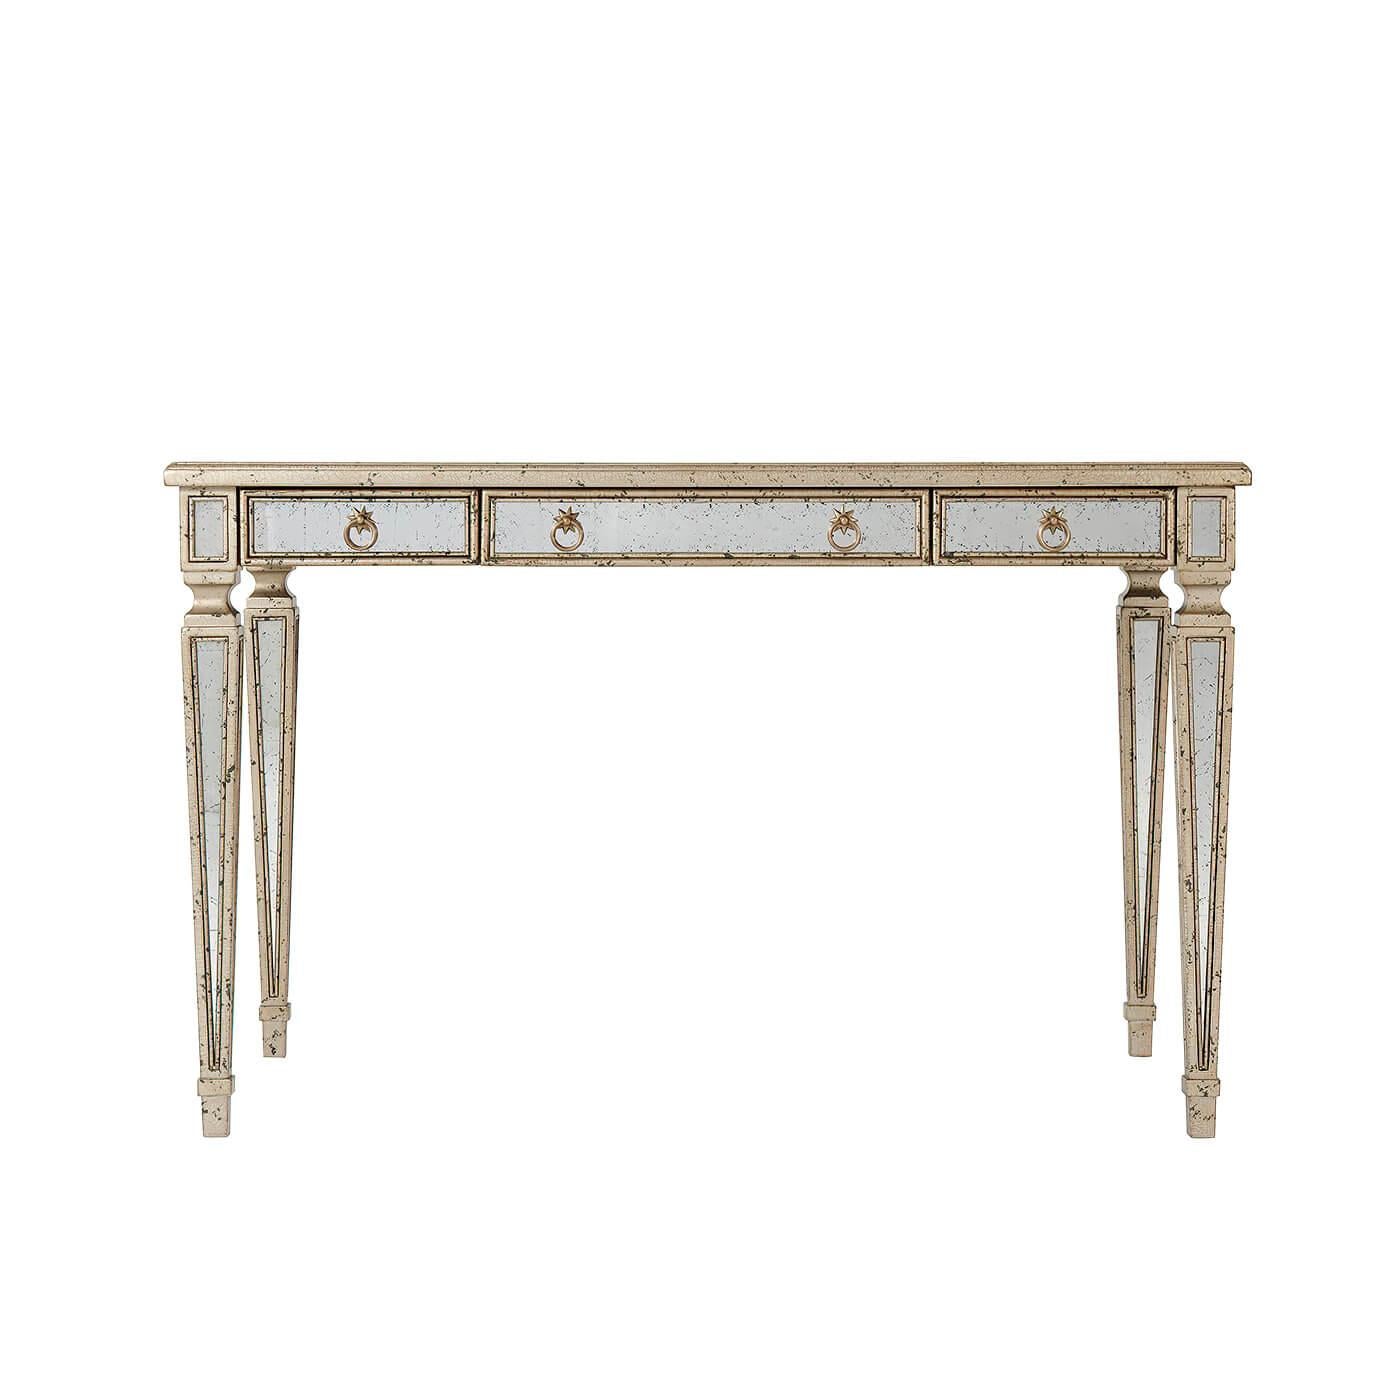 An Art Deco-style mirrored desk with silver leaf and antiqued mirror, the rectangular mirror paneled top above three drawers with brass handles, on mirror inset square tapering legs. Inspired by a 1930s Italian original.

Dimensions: 48